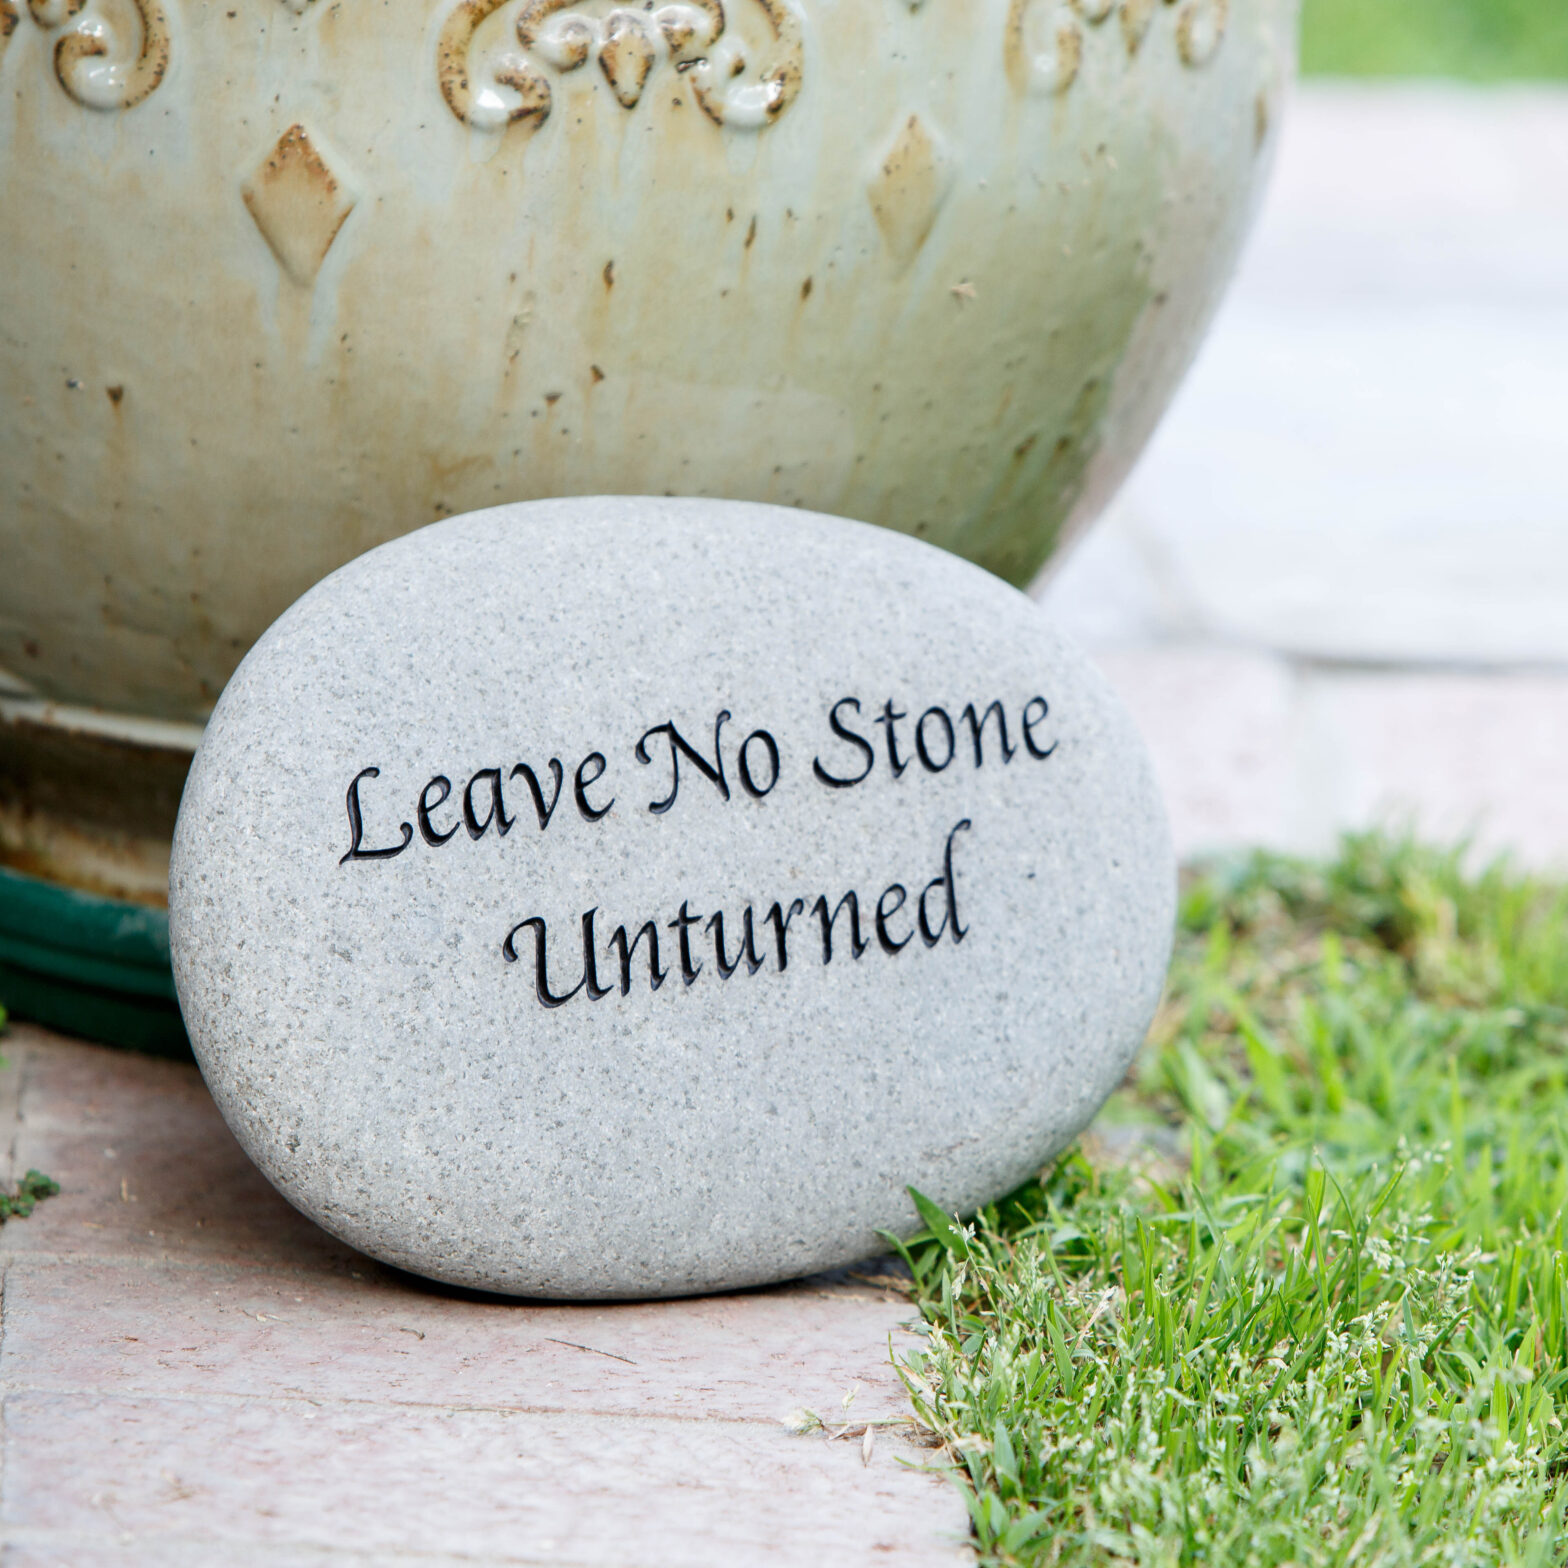 Leave no Stone Unturned.